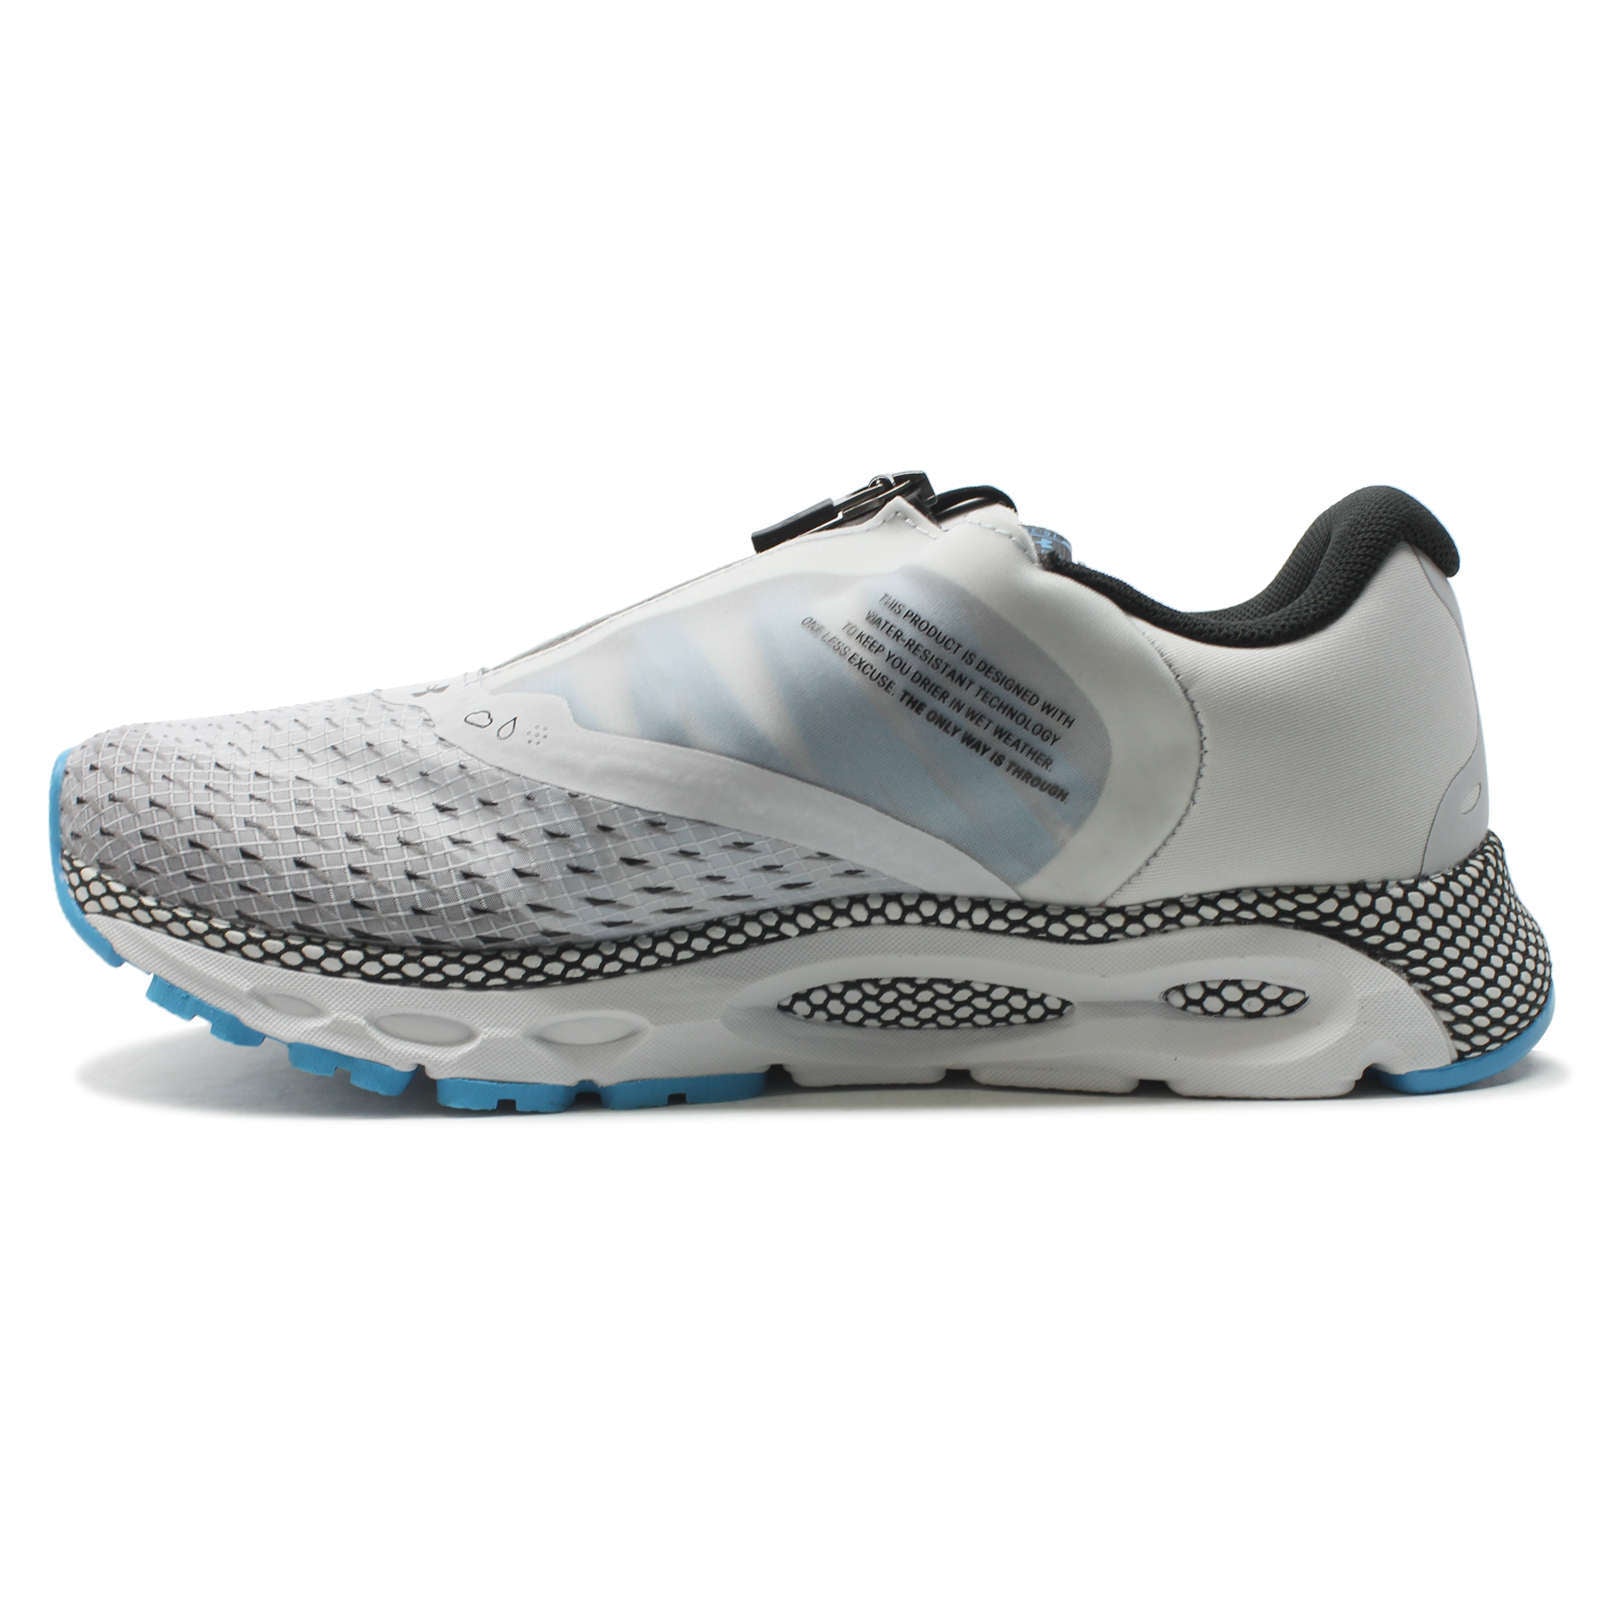 Under Armour HOVR Infinite 3 Storm Synthetic Textile Men's Low-Top Trainers#color_grey grey